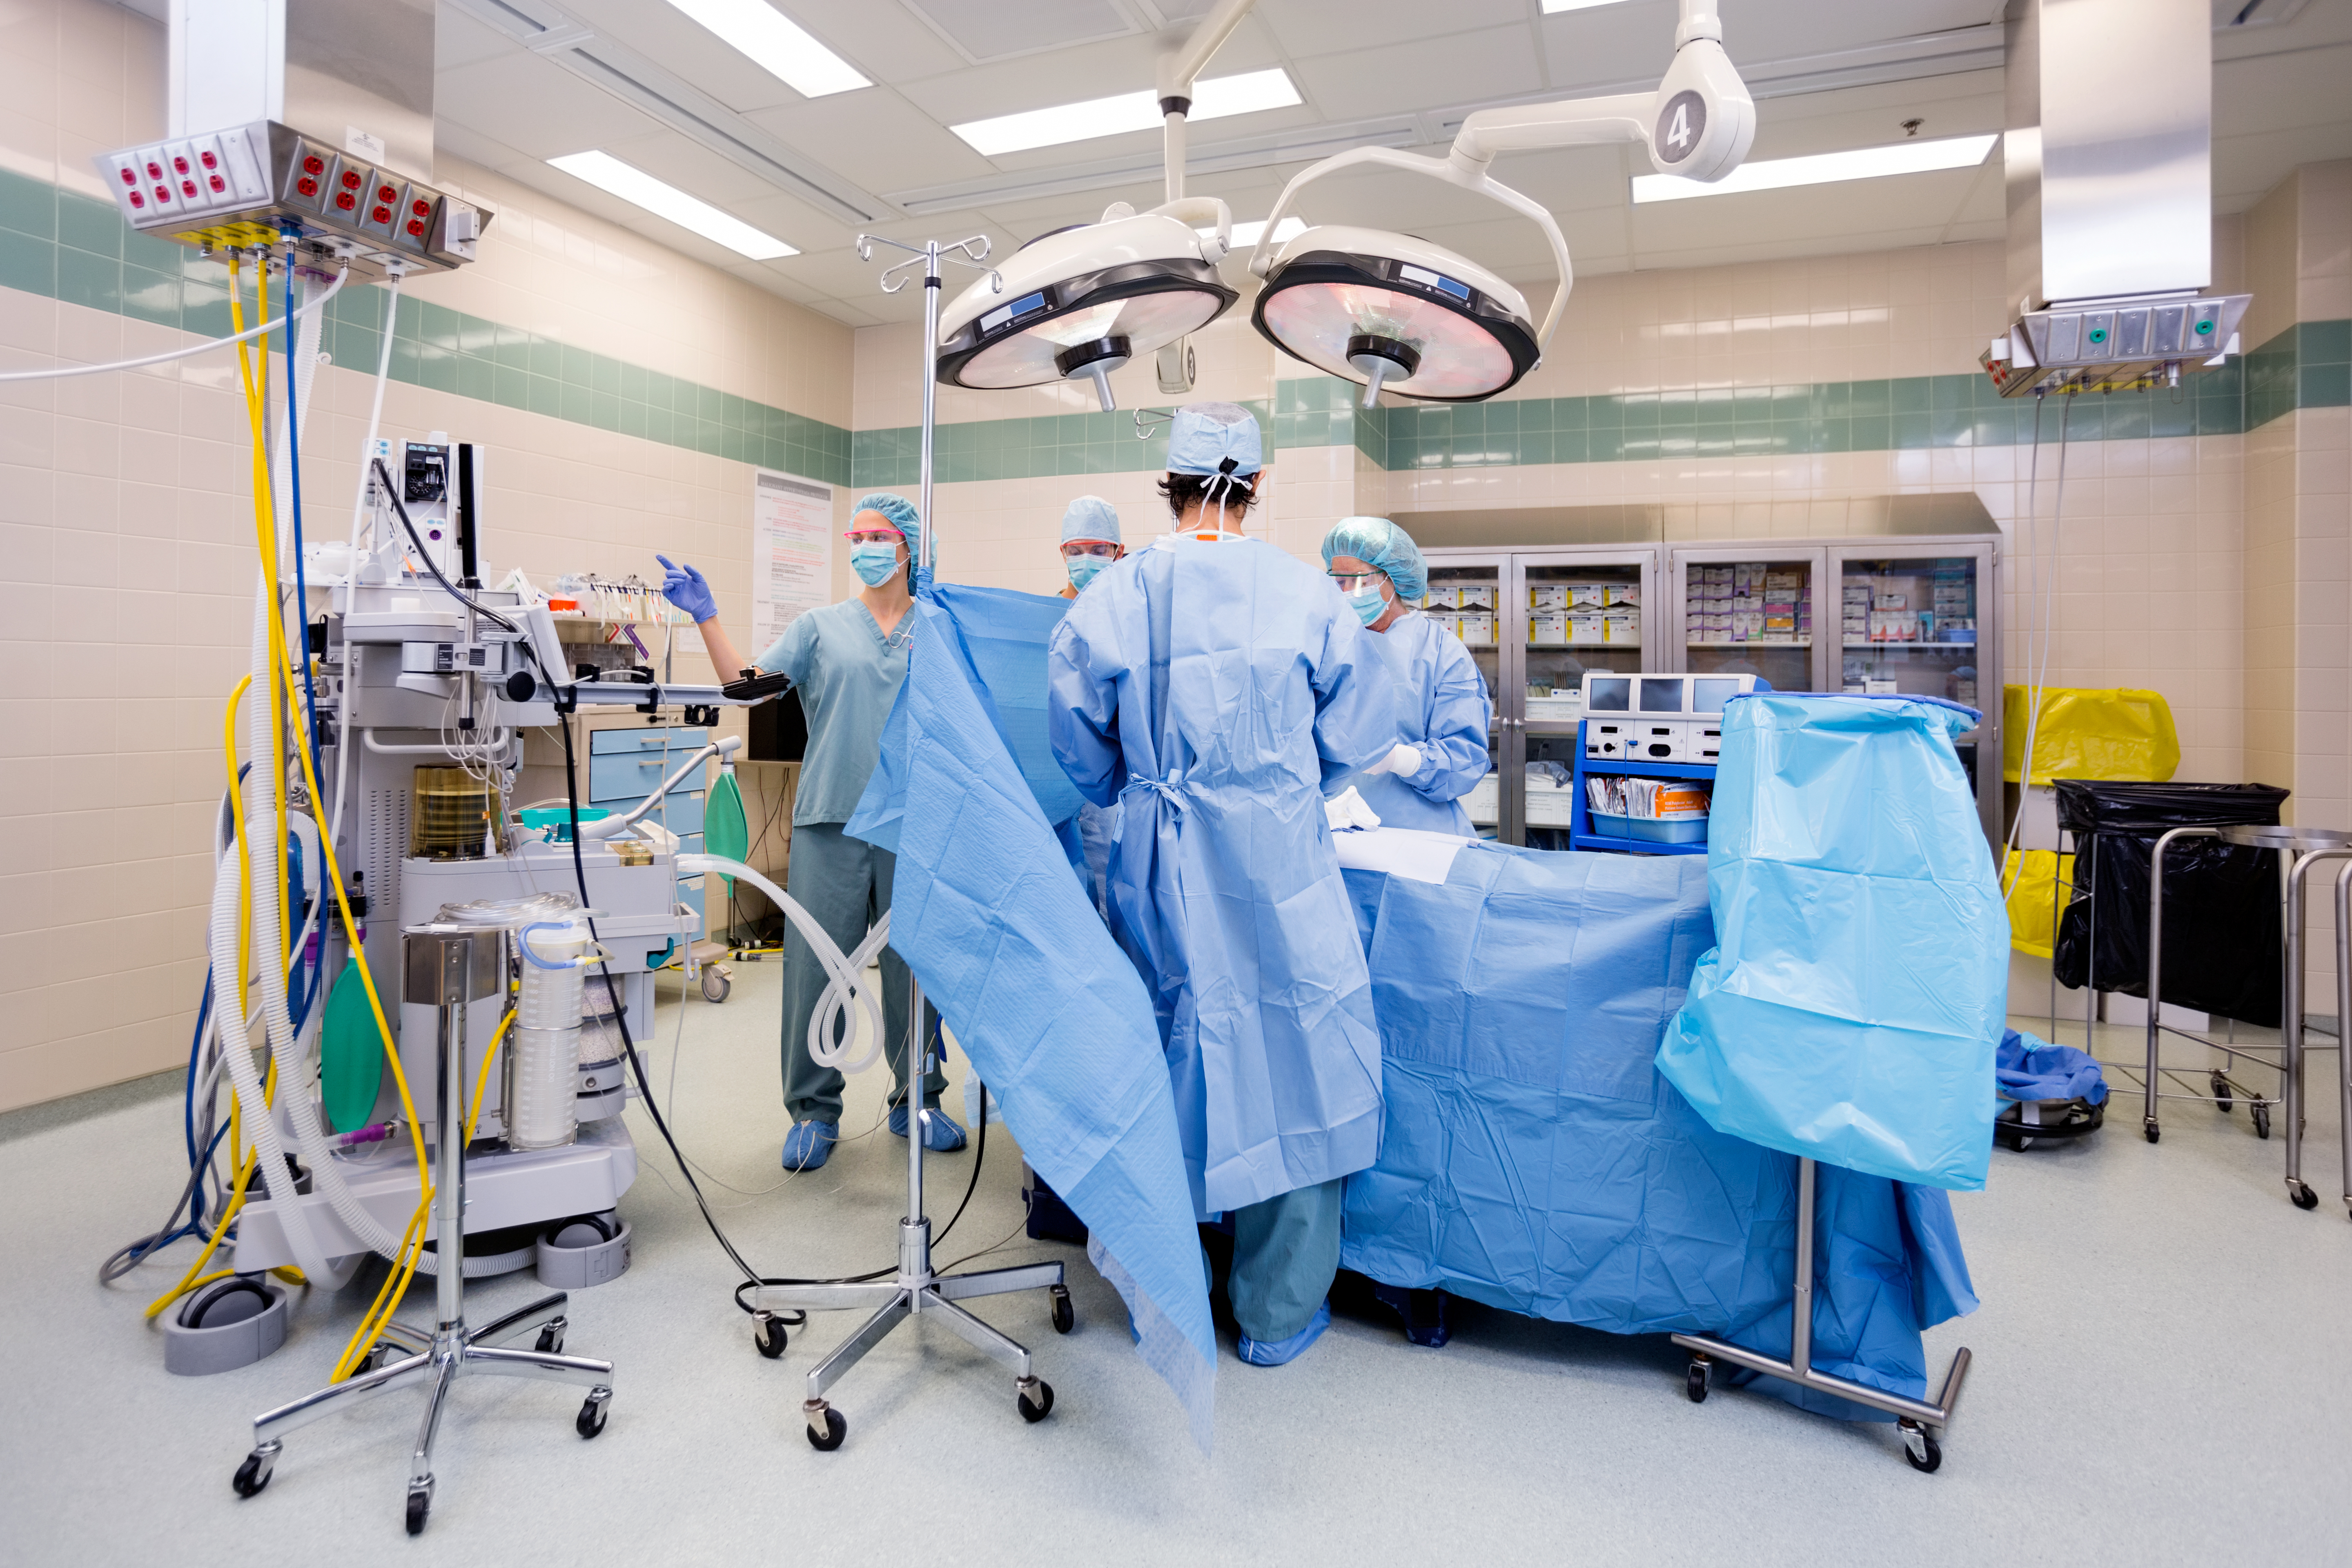 People in an operation room. | Source: Shutterstock